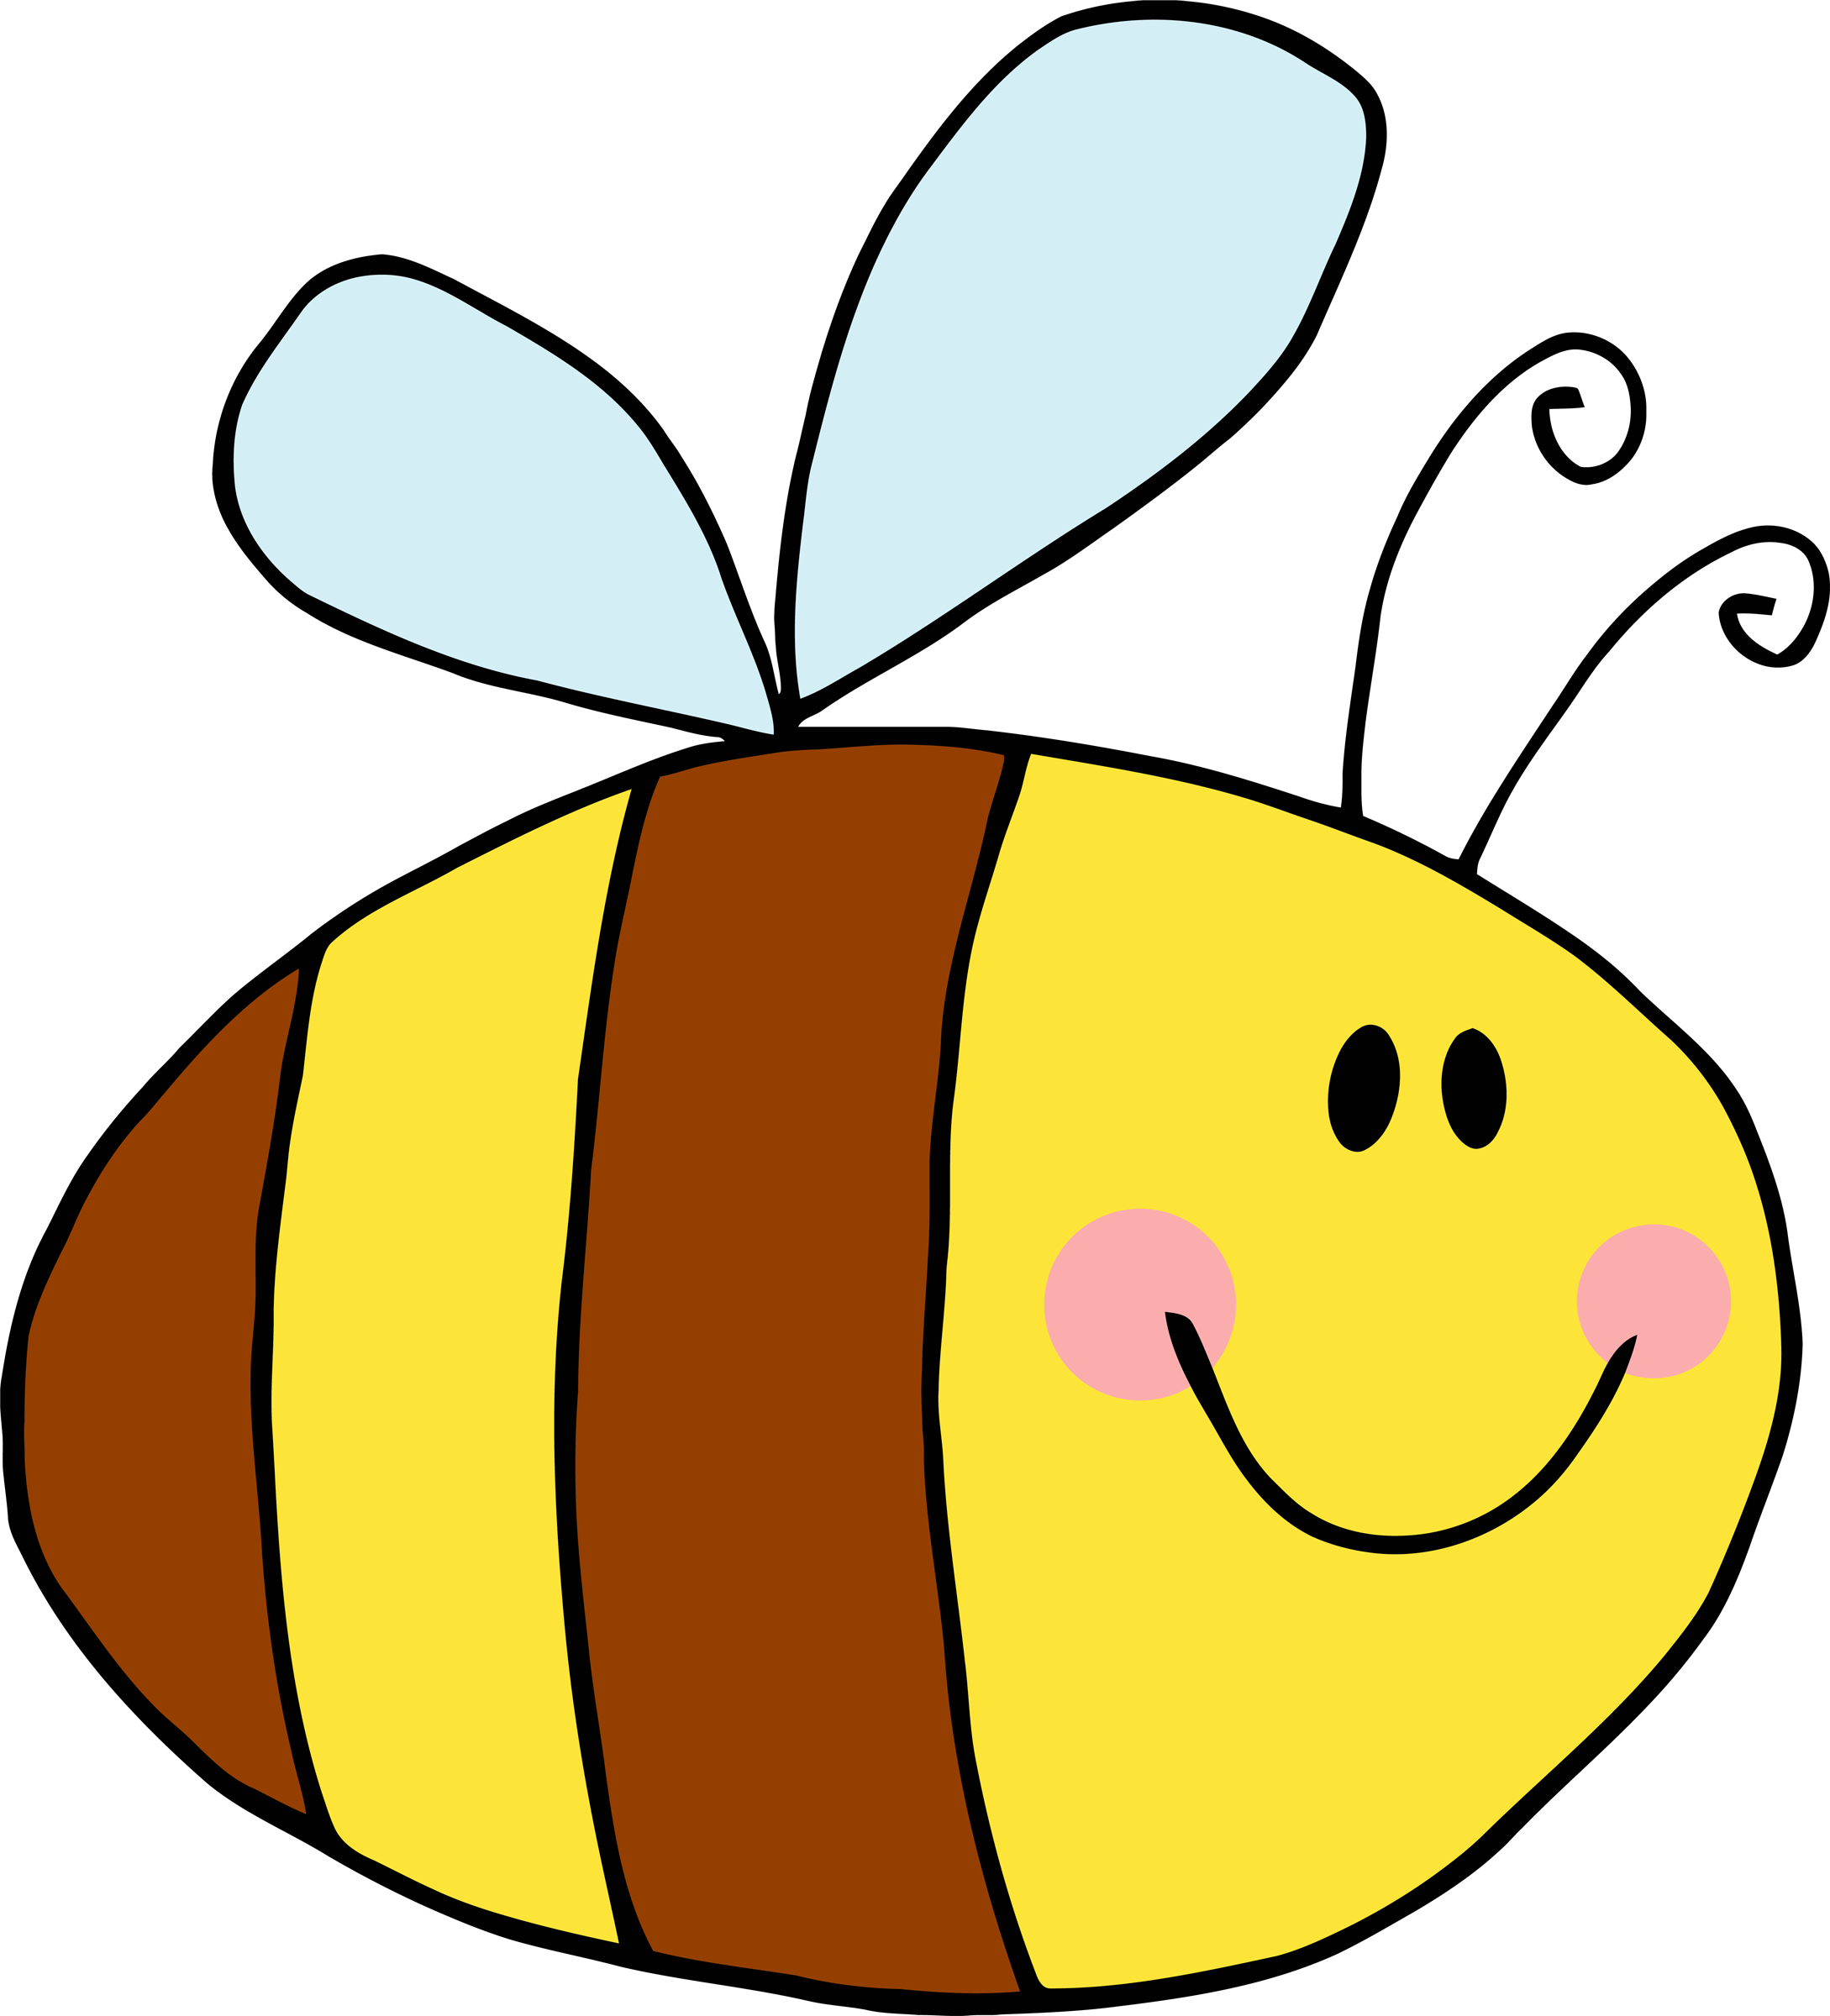 Cartoon Pictures Of Bees - ClipArt Best